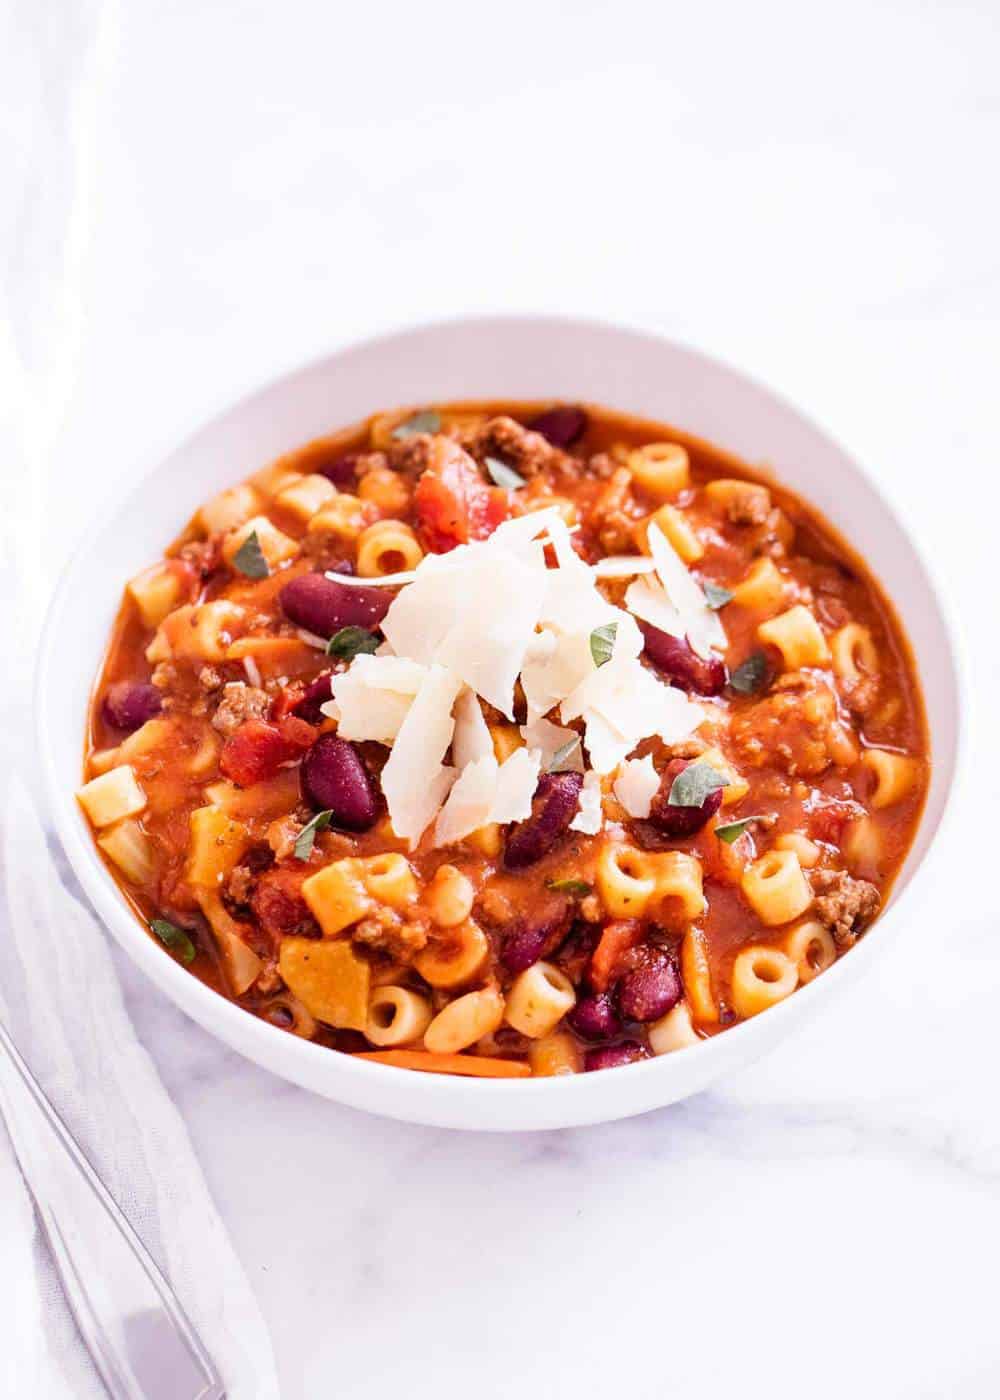 Bowl of pasta fagioli with shaved parmesan on top.